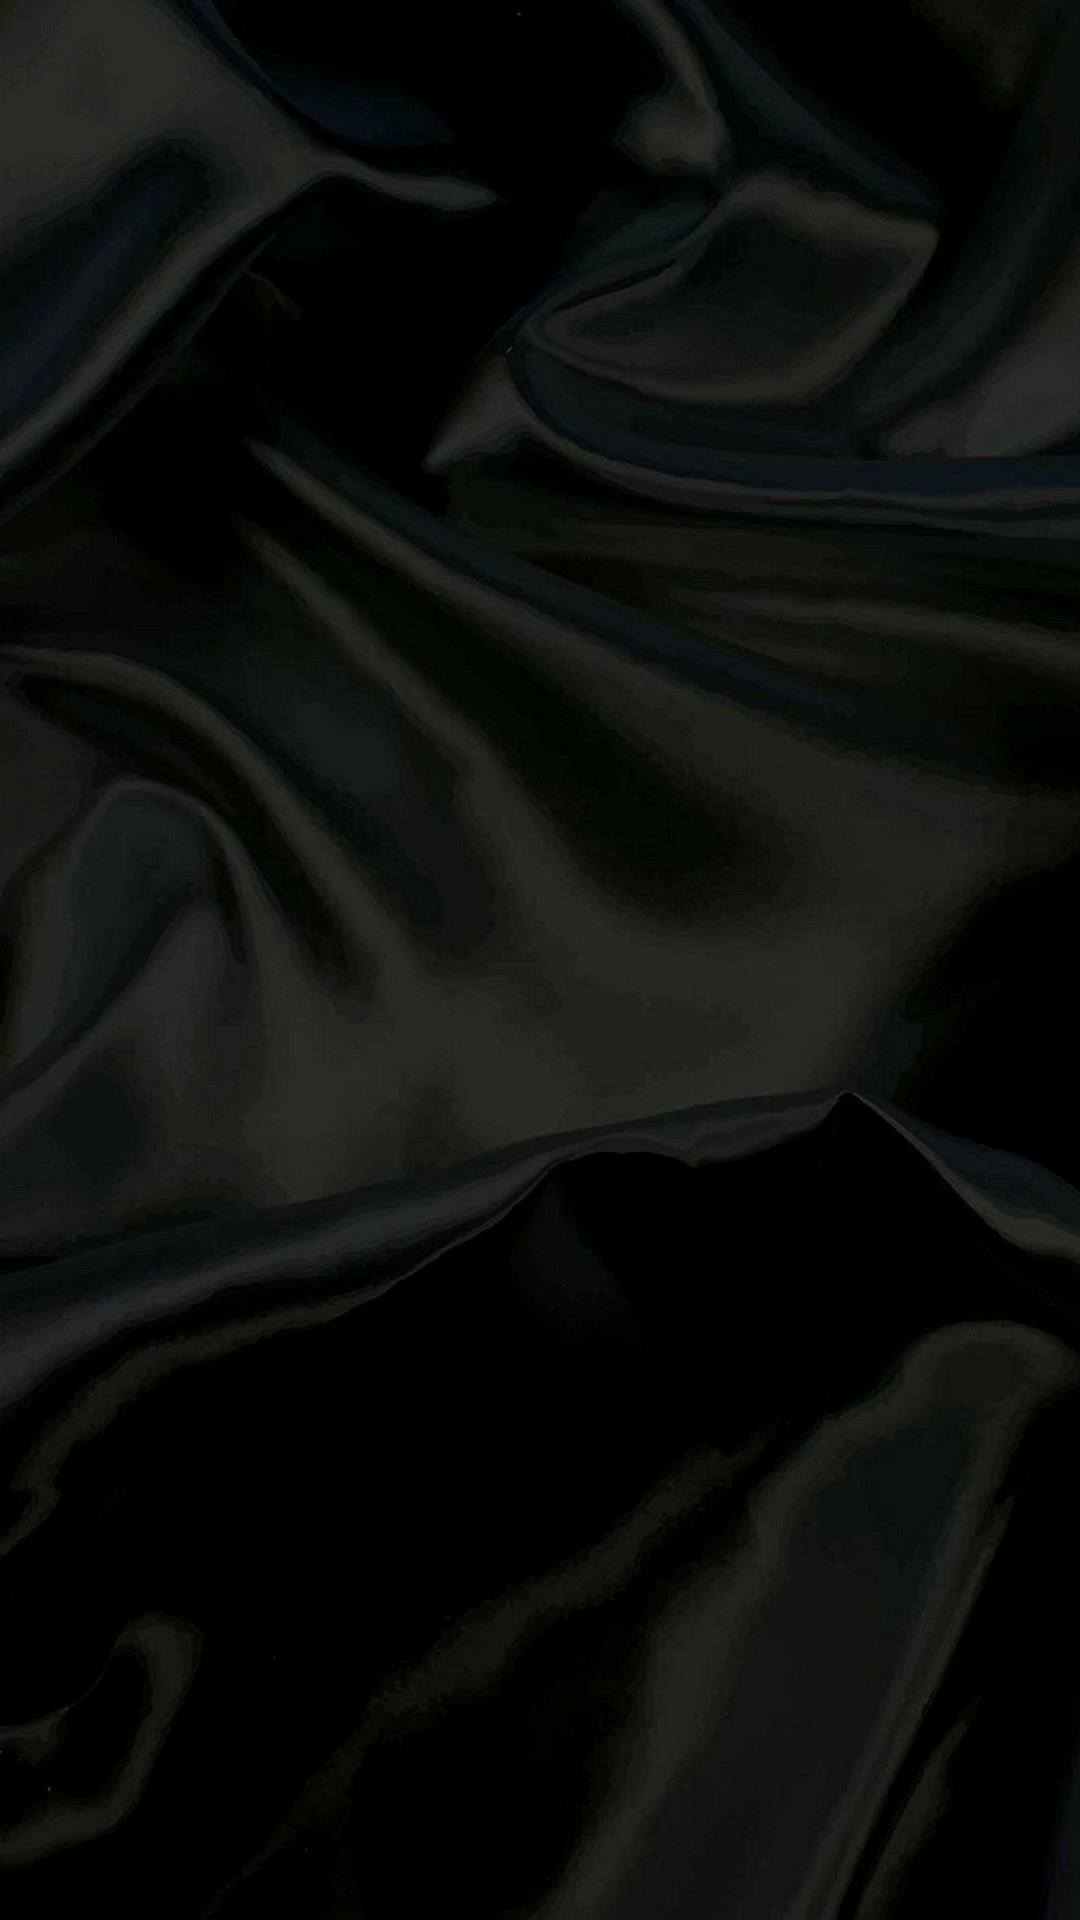 Android Wallpaper Black Silk with high-resolution 1080x1920 pixel. You can use this wallpaper for your Android backgrounds, Tablet, Samsung Screensavers, Mobile Phone Lock Screen and another Smartphones device